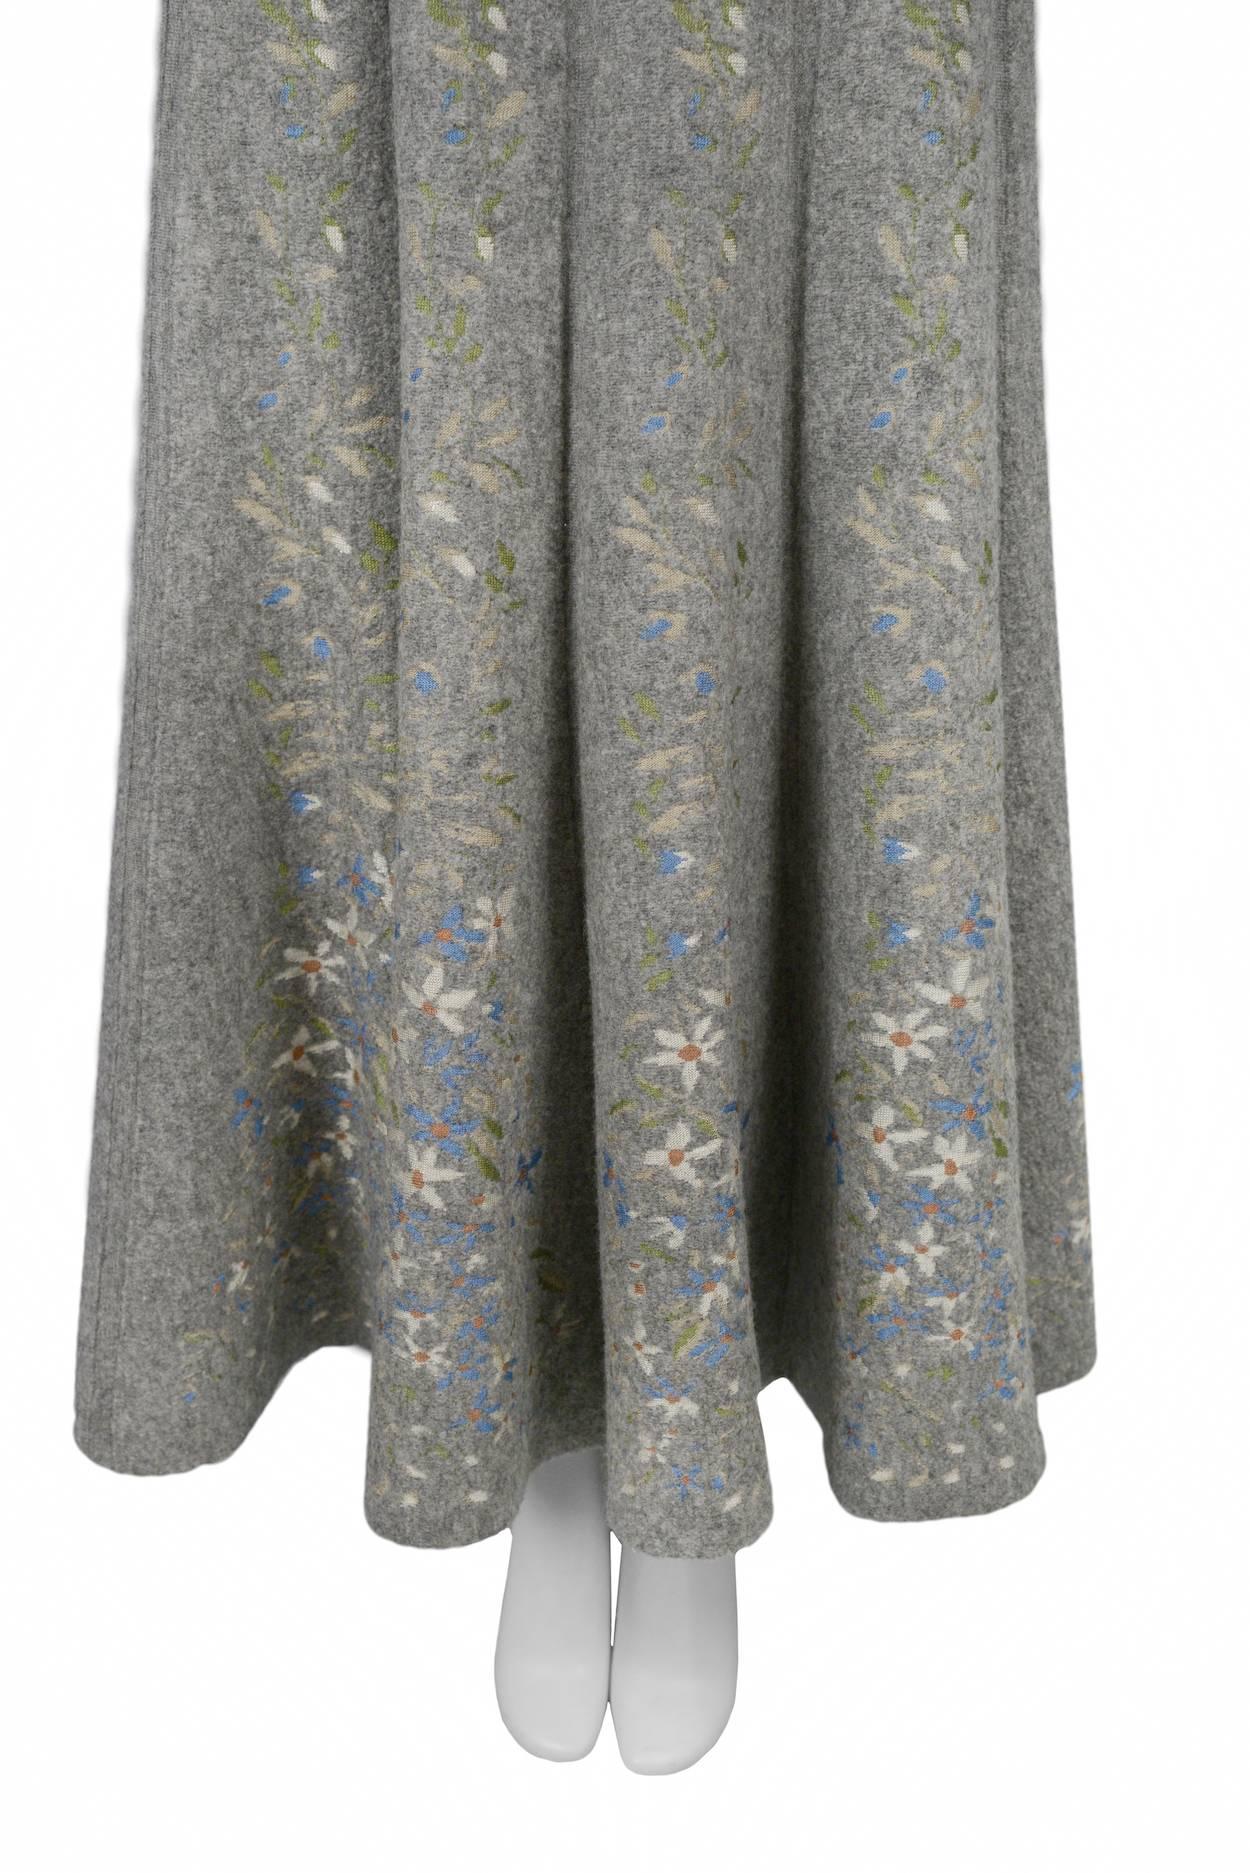 Alaia Iconic Grey Floral Instarsia Skirt 1990 In Excellent Condition In Los Angeles, CA